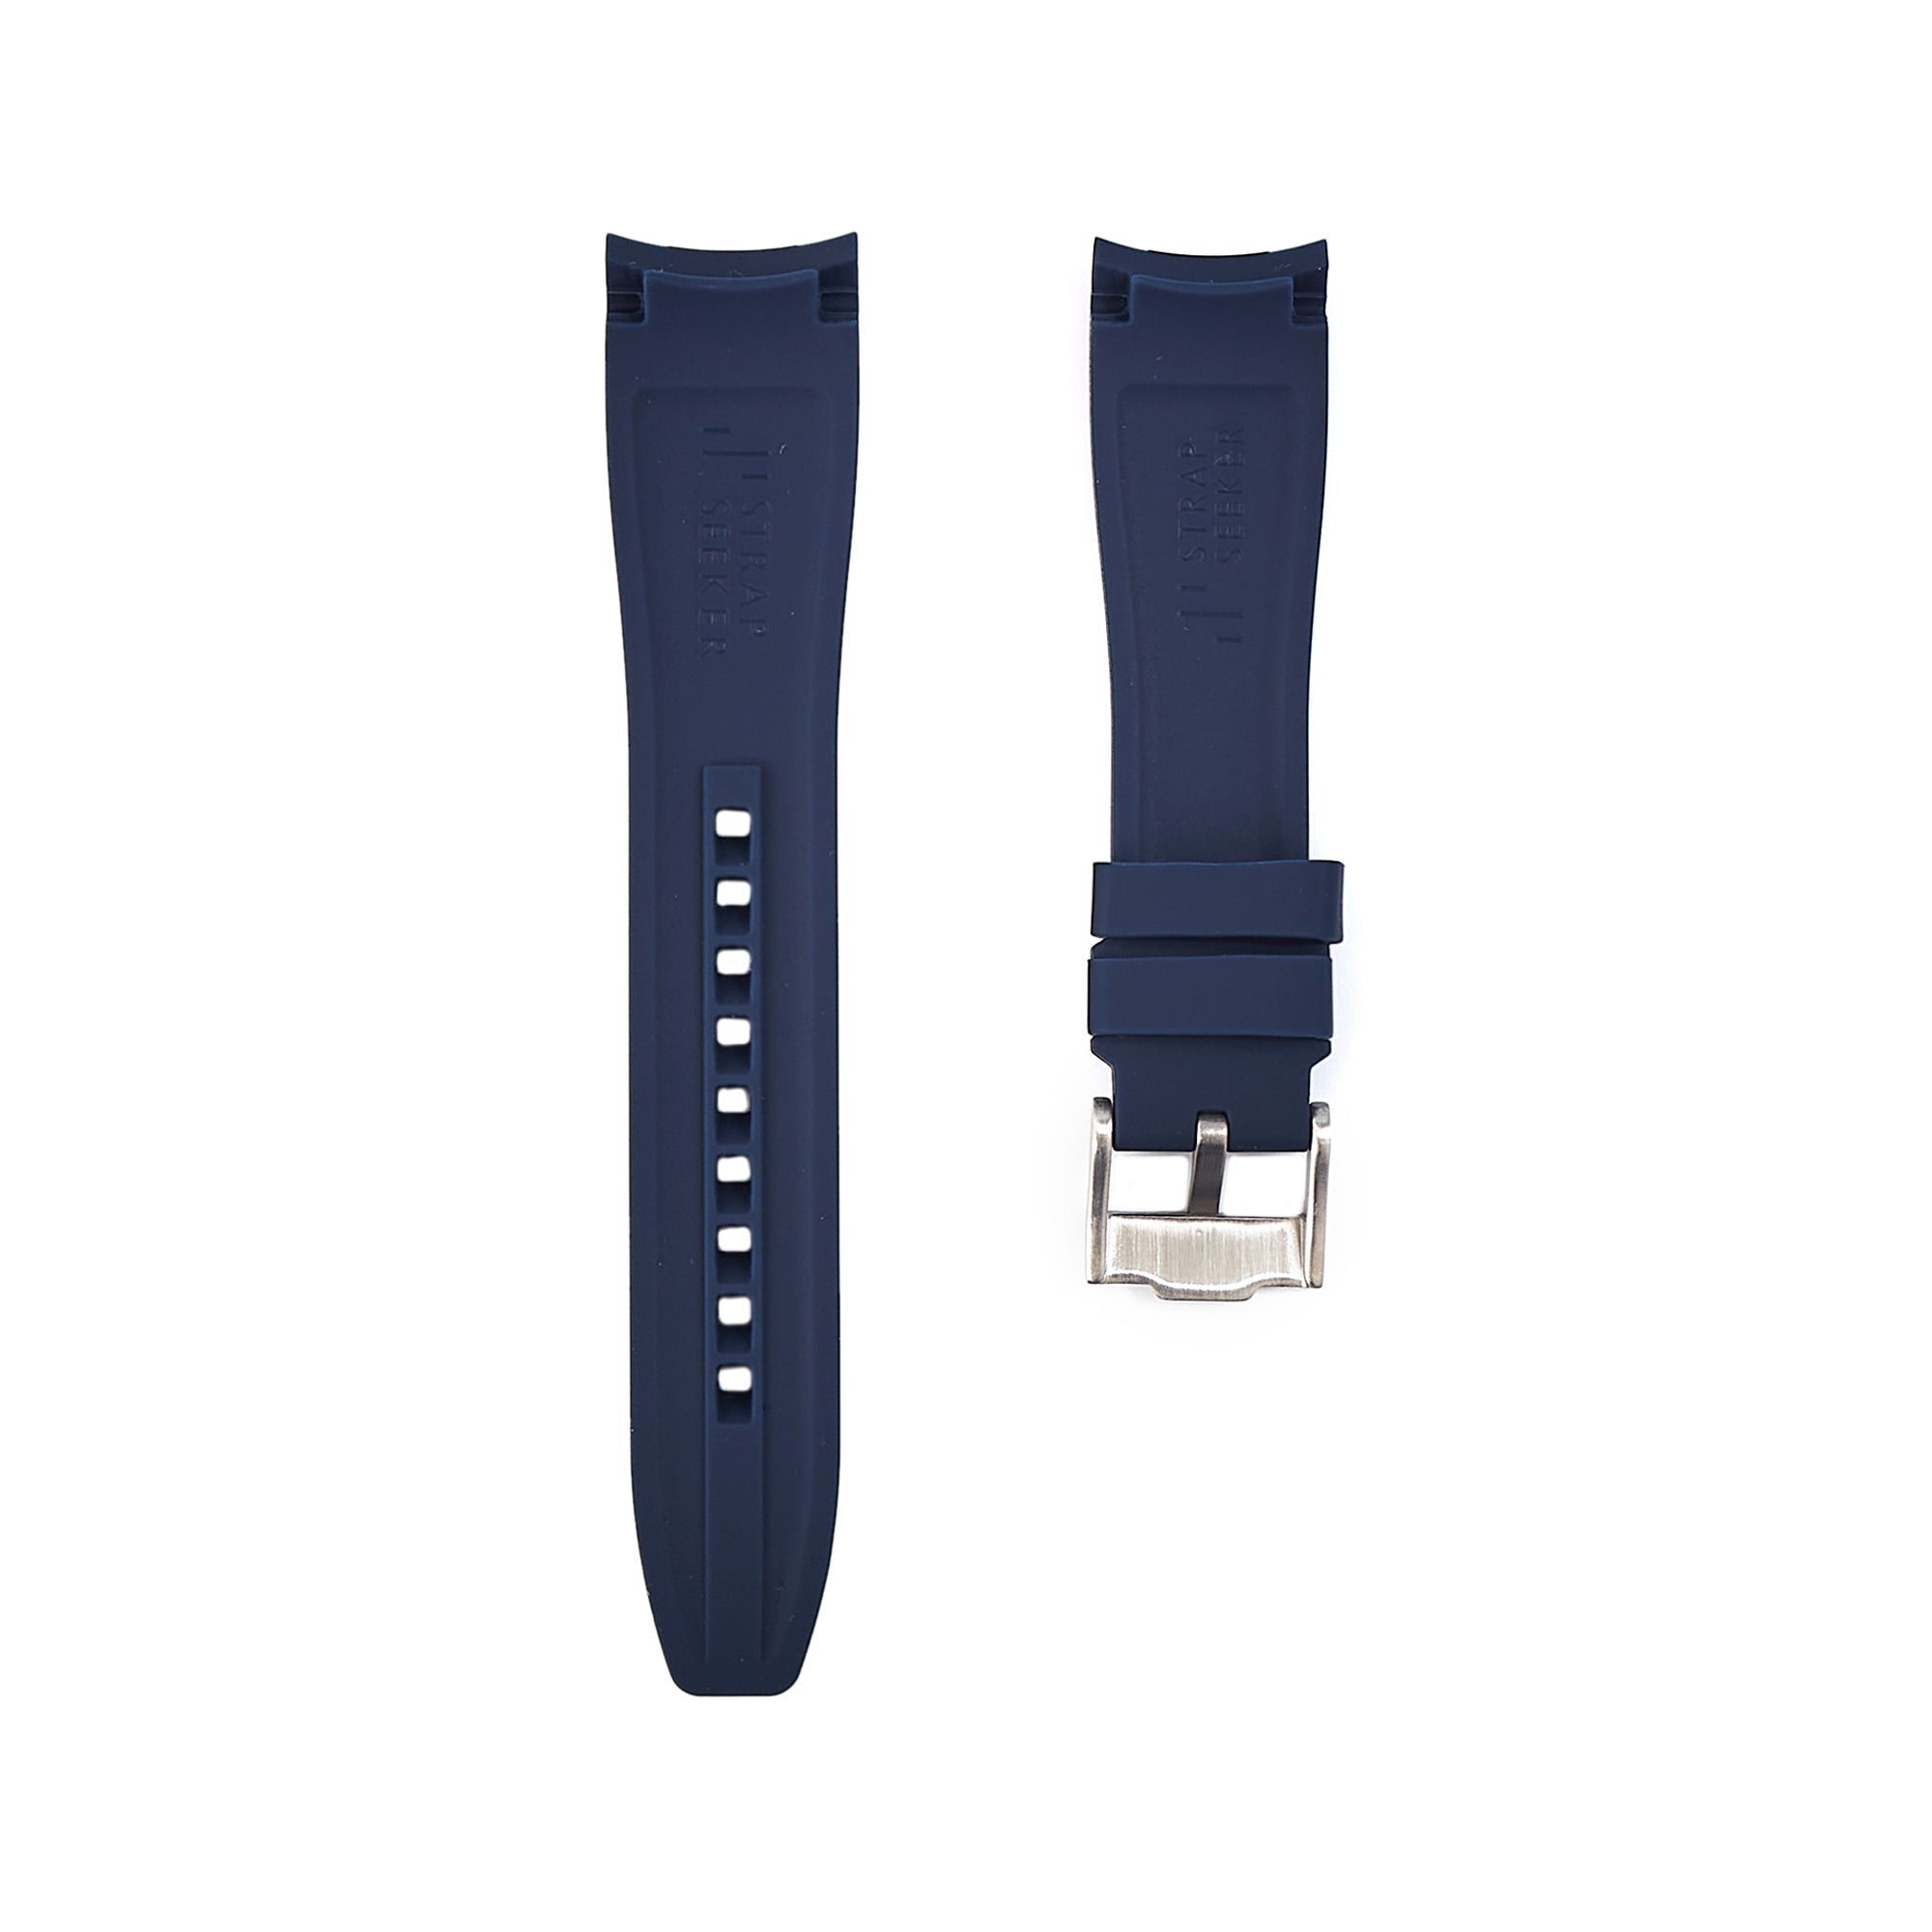 Curved End Soft Silicone Strap - Compatible with Omega x Swatch – Navy (2418) -StrapSeeker